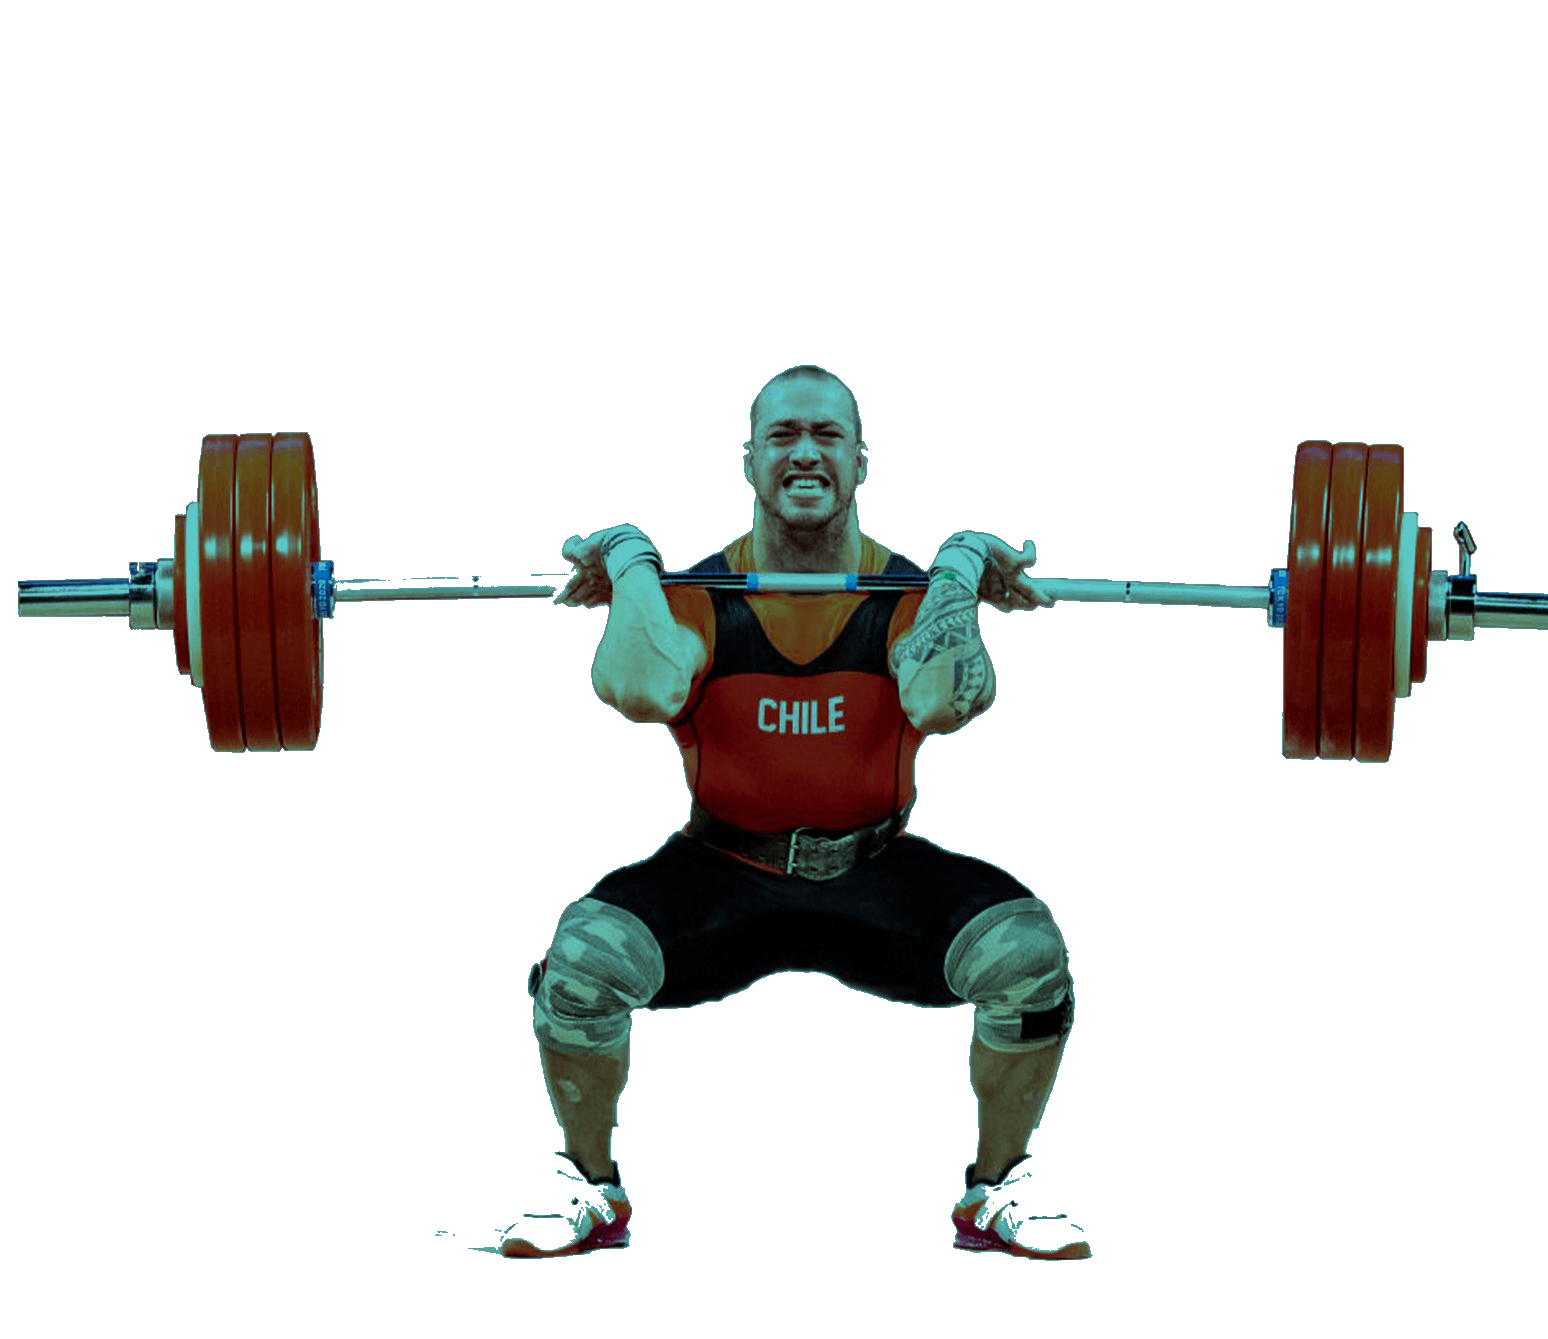 In the picture, there is a male weightlifter holding a bar above his head.